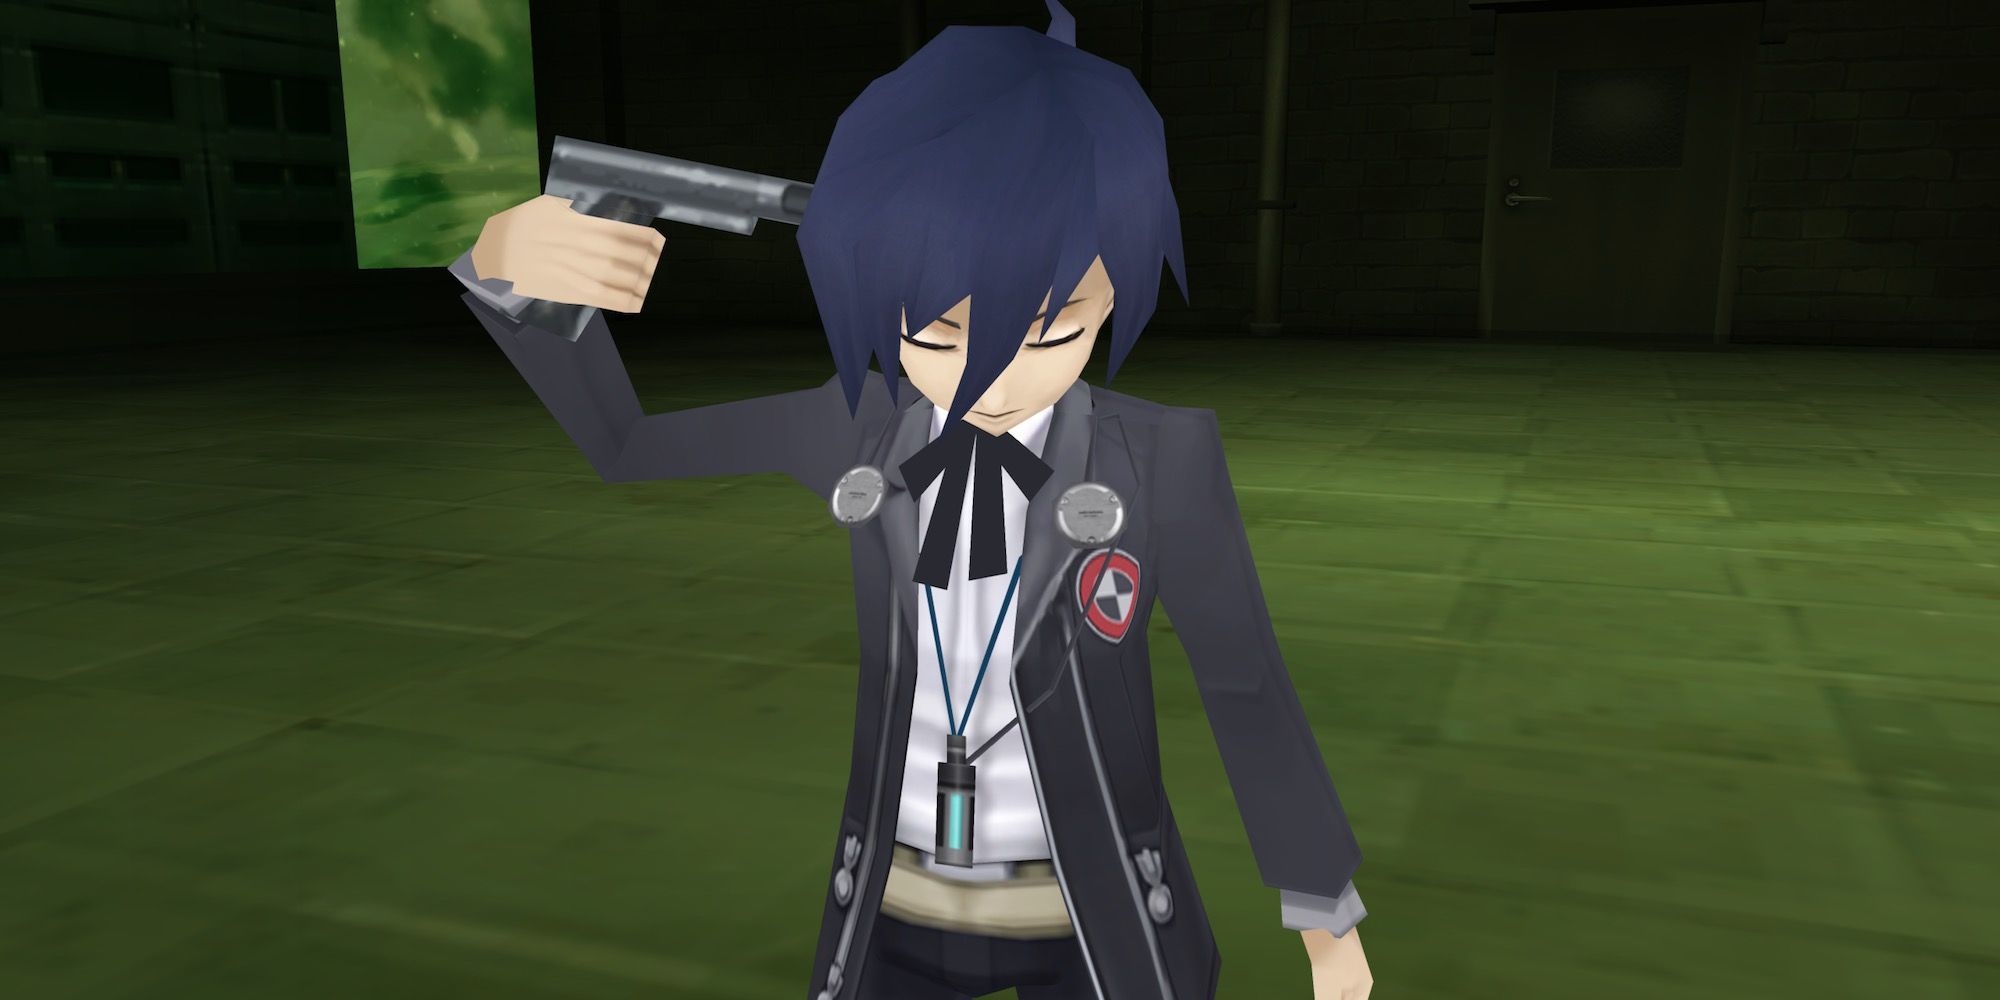 Summoning your Persona with your Evoker in Persona 3 Portable